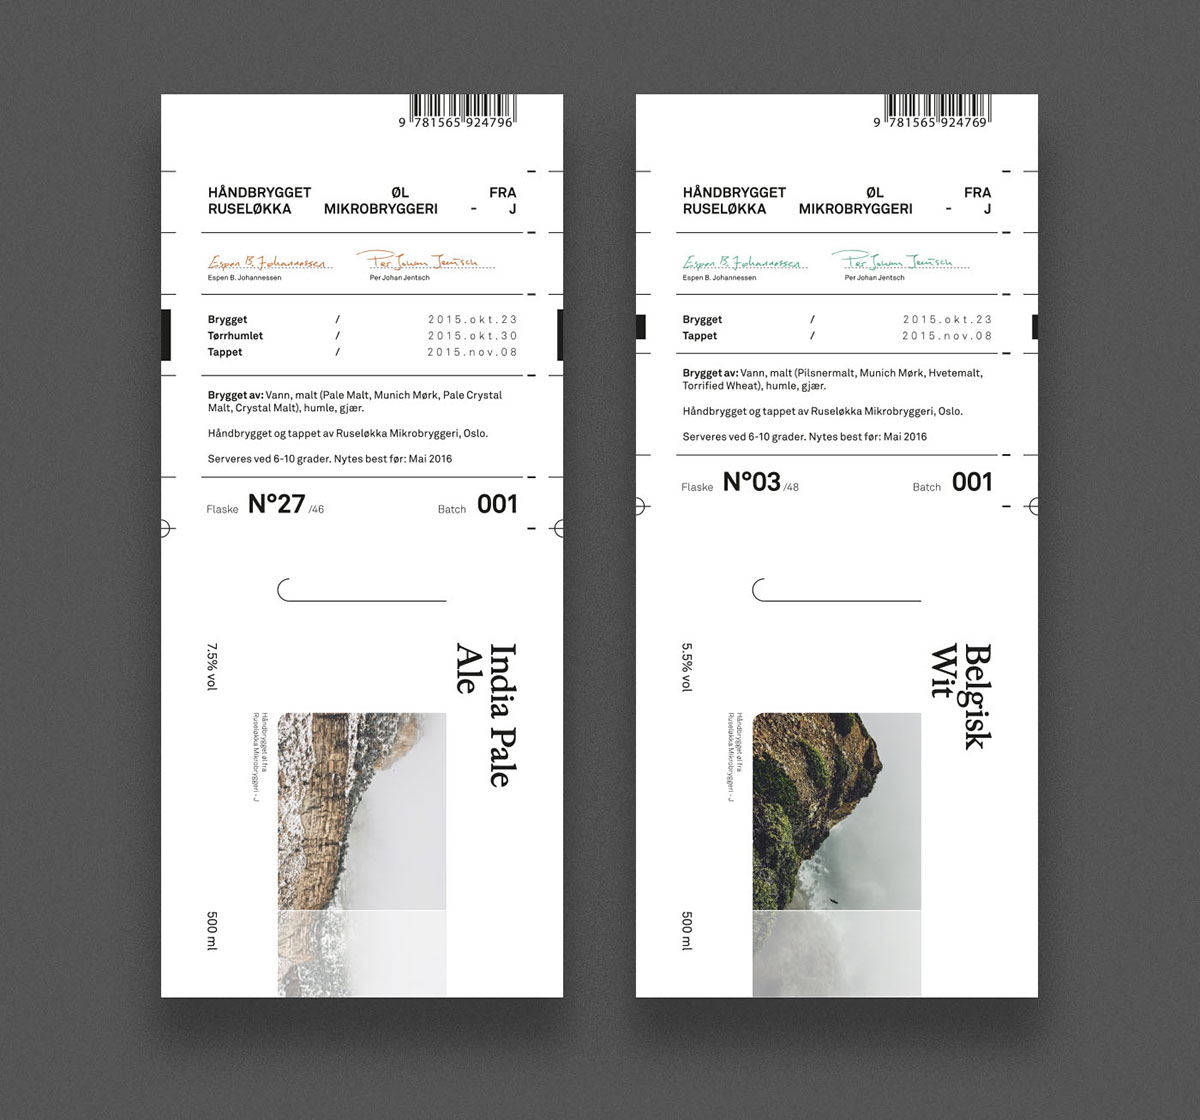 beer craft craftbeer Label tag Microbrewery Packaging concept